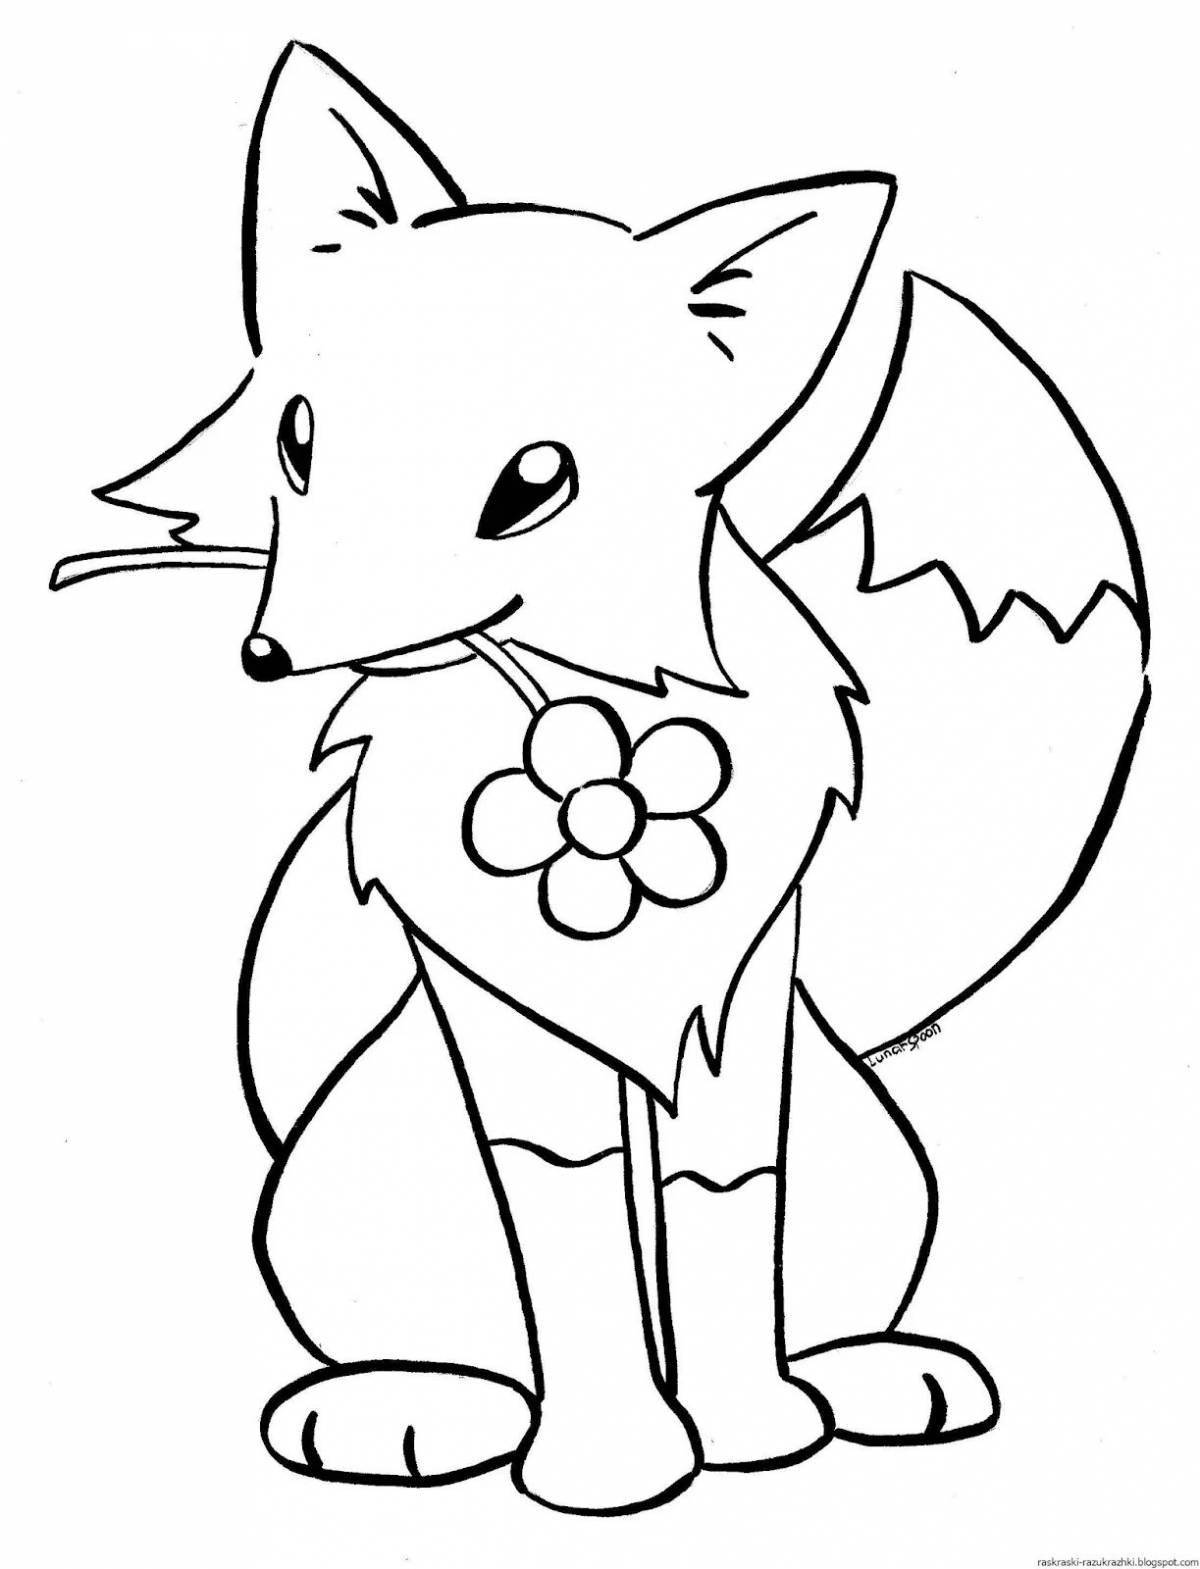 Fuzzy coloring fox with cubes